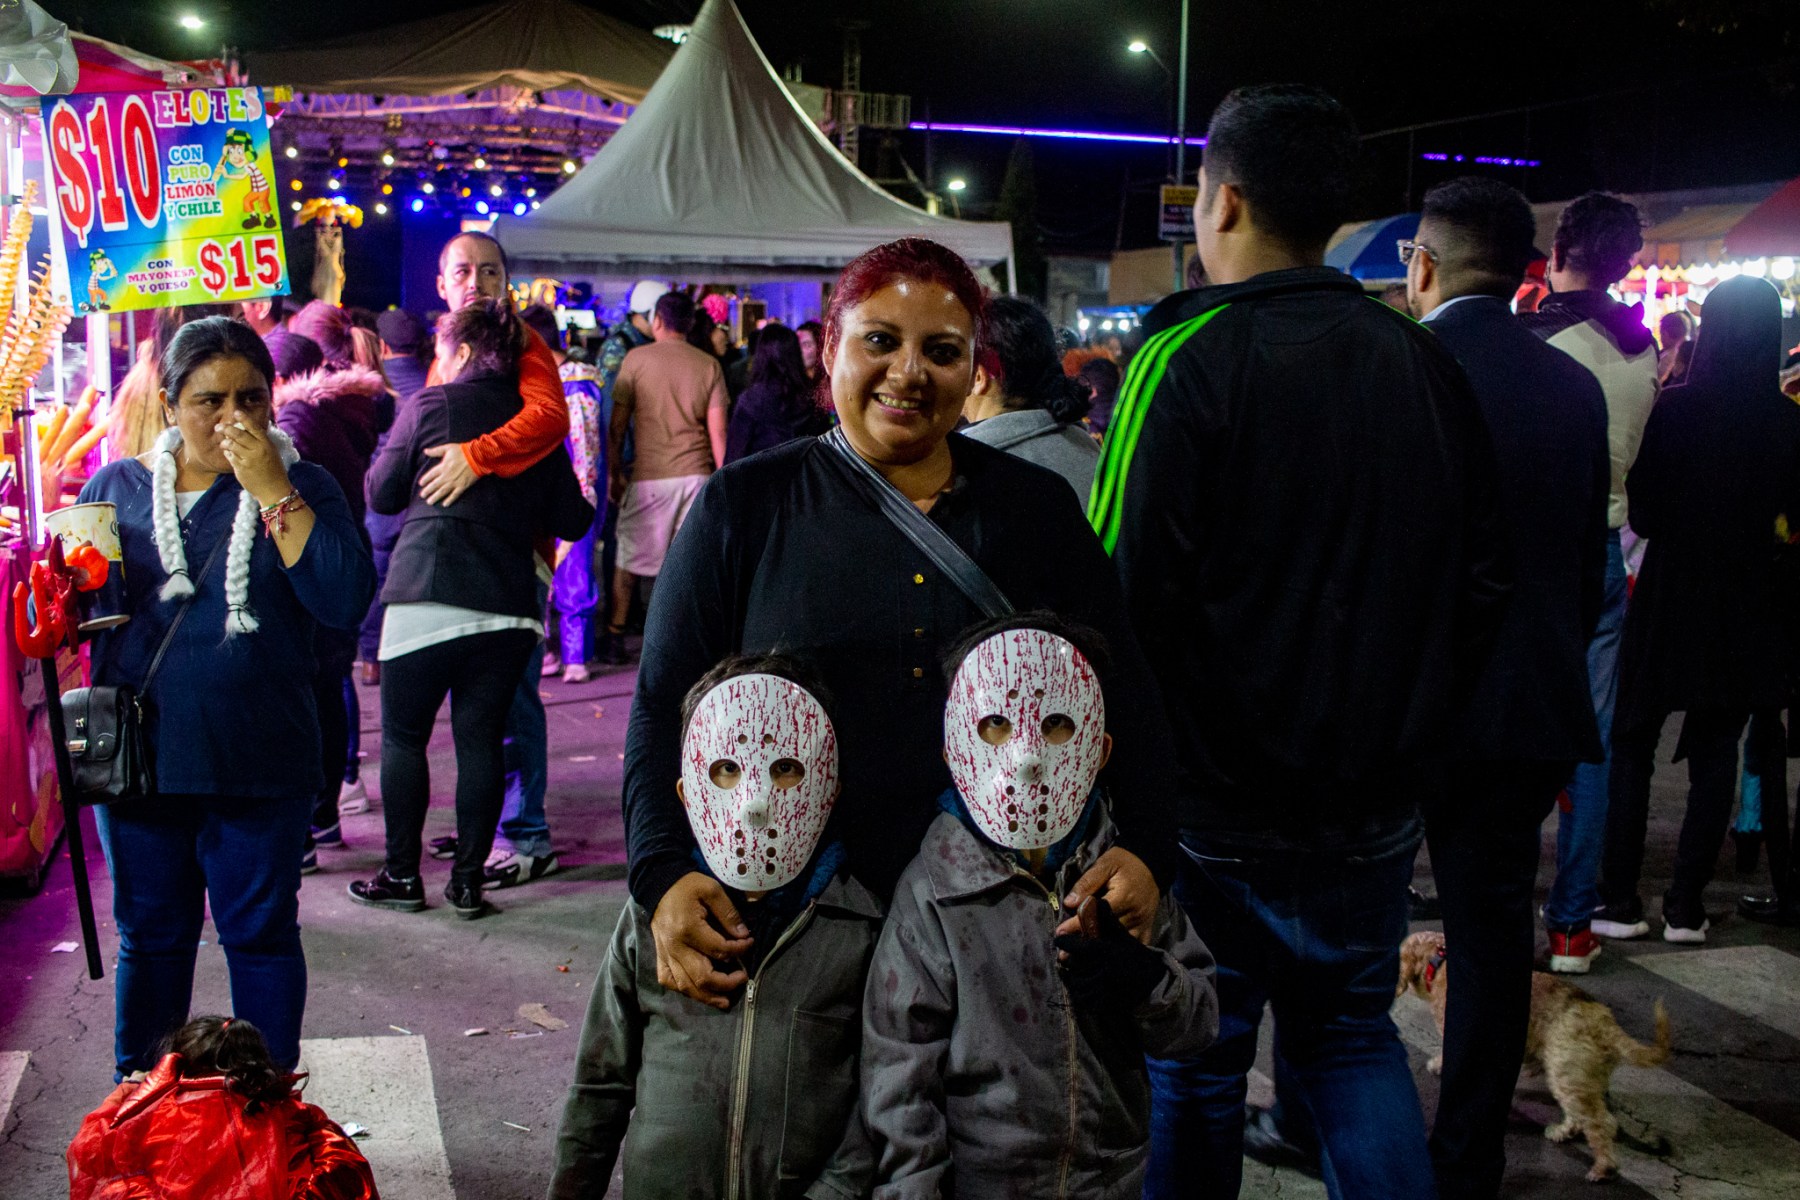 I don’t often ask people to pose for my photos, but I saw this mother leading her two children around in bloody hockey masks and couldn't resist.